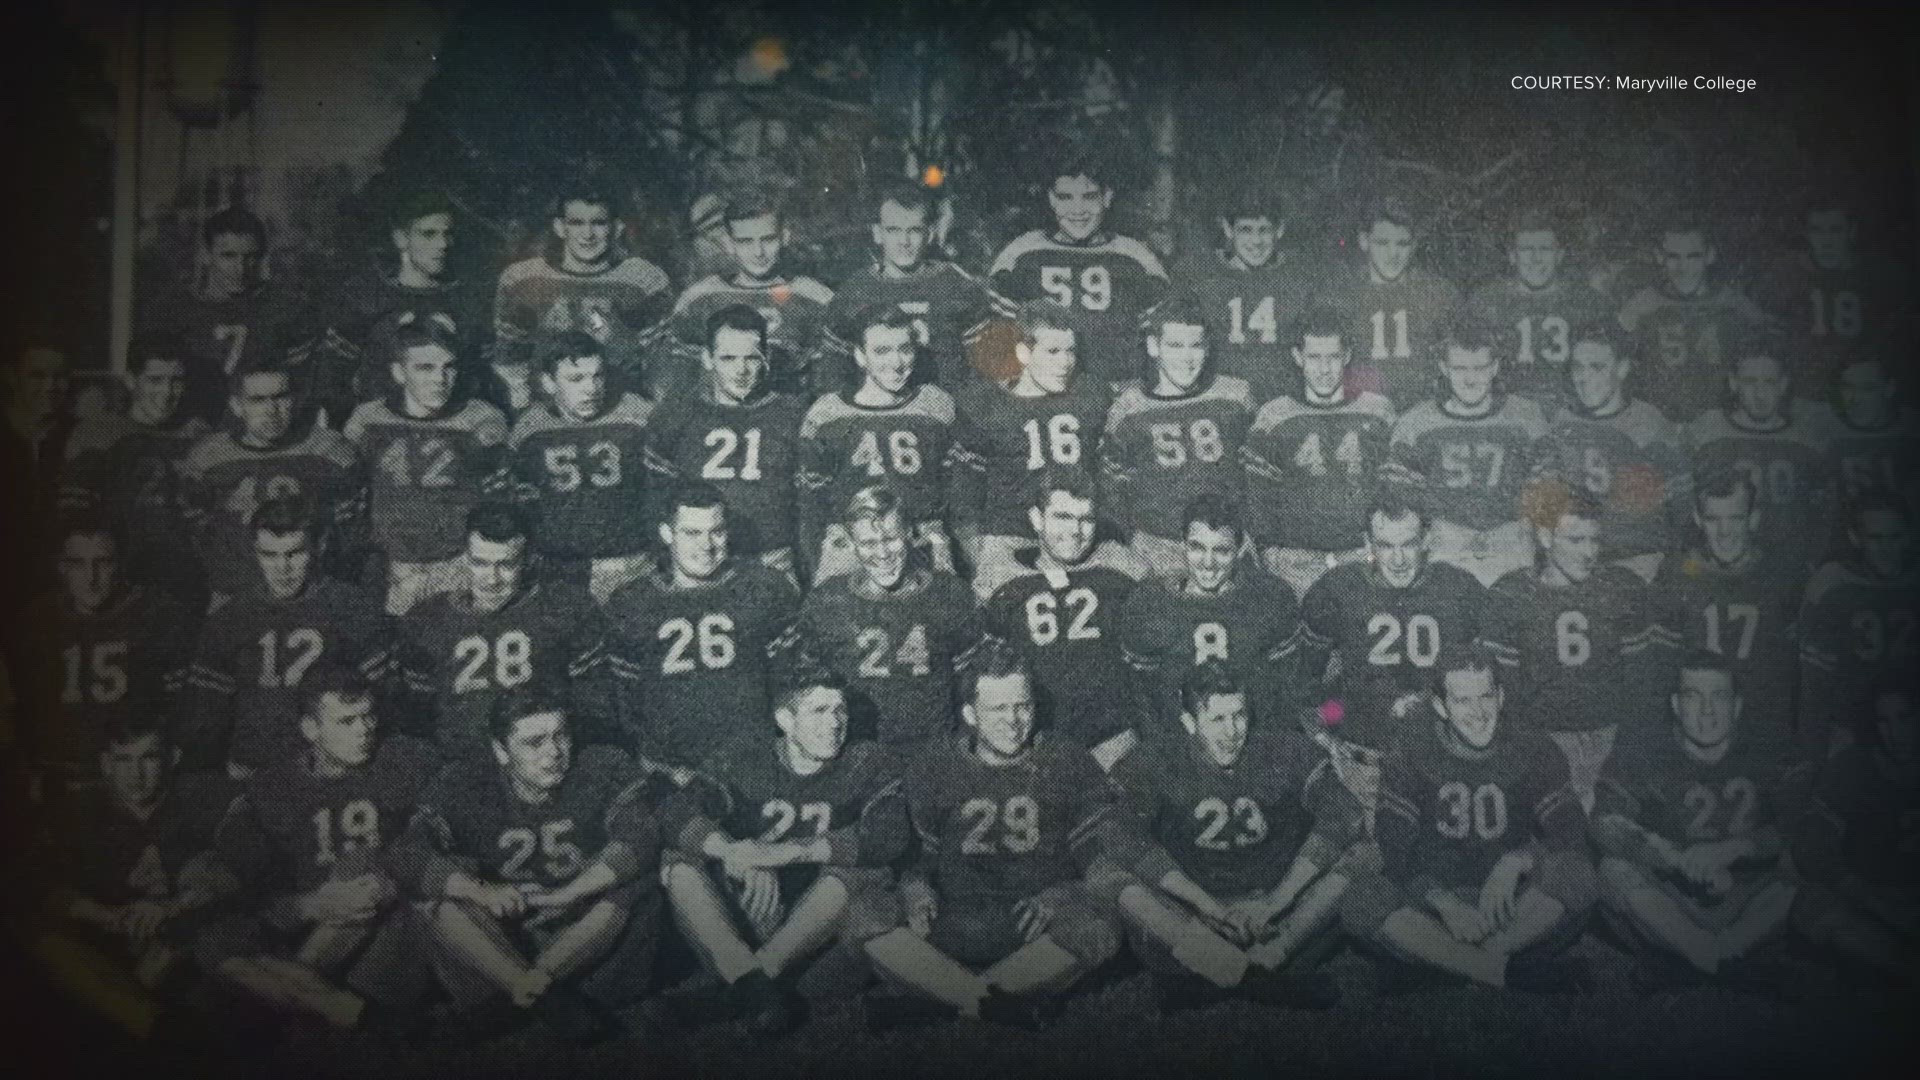 It’s a game dating back nearly eight decades, and one East Tennessee team kicked off the whole thing.